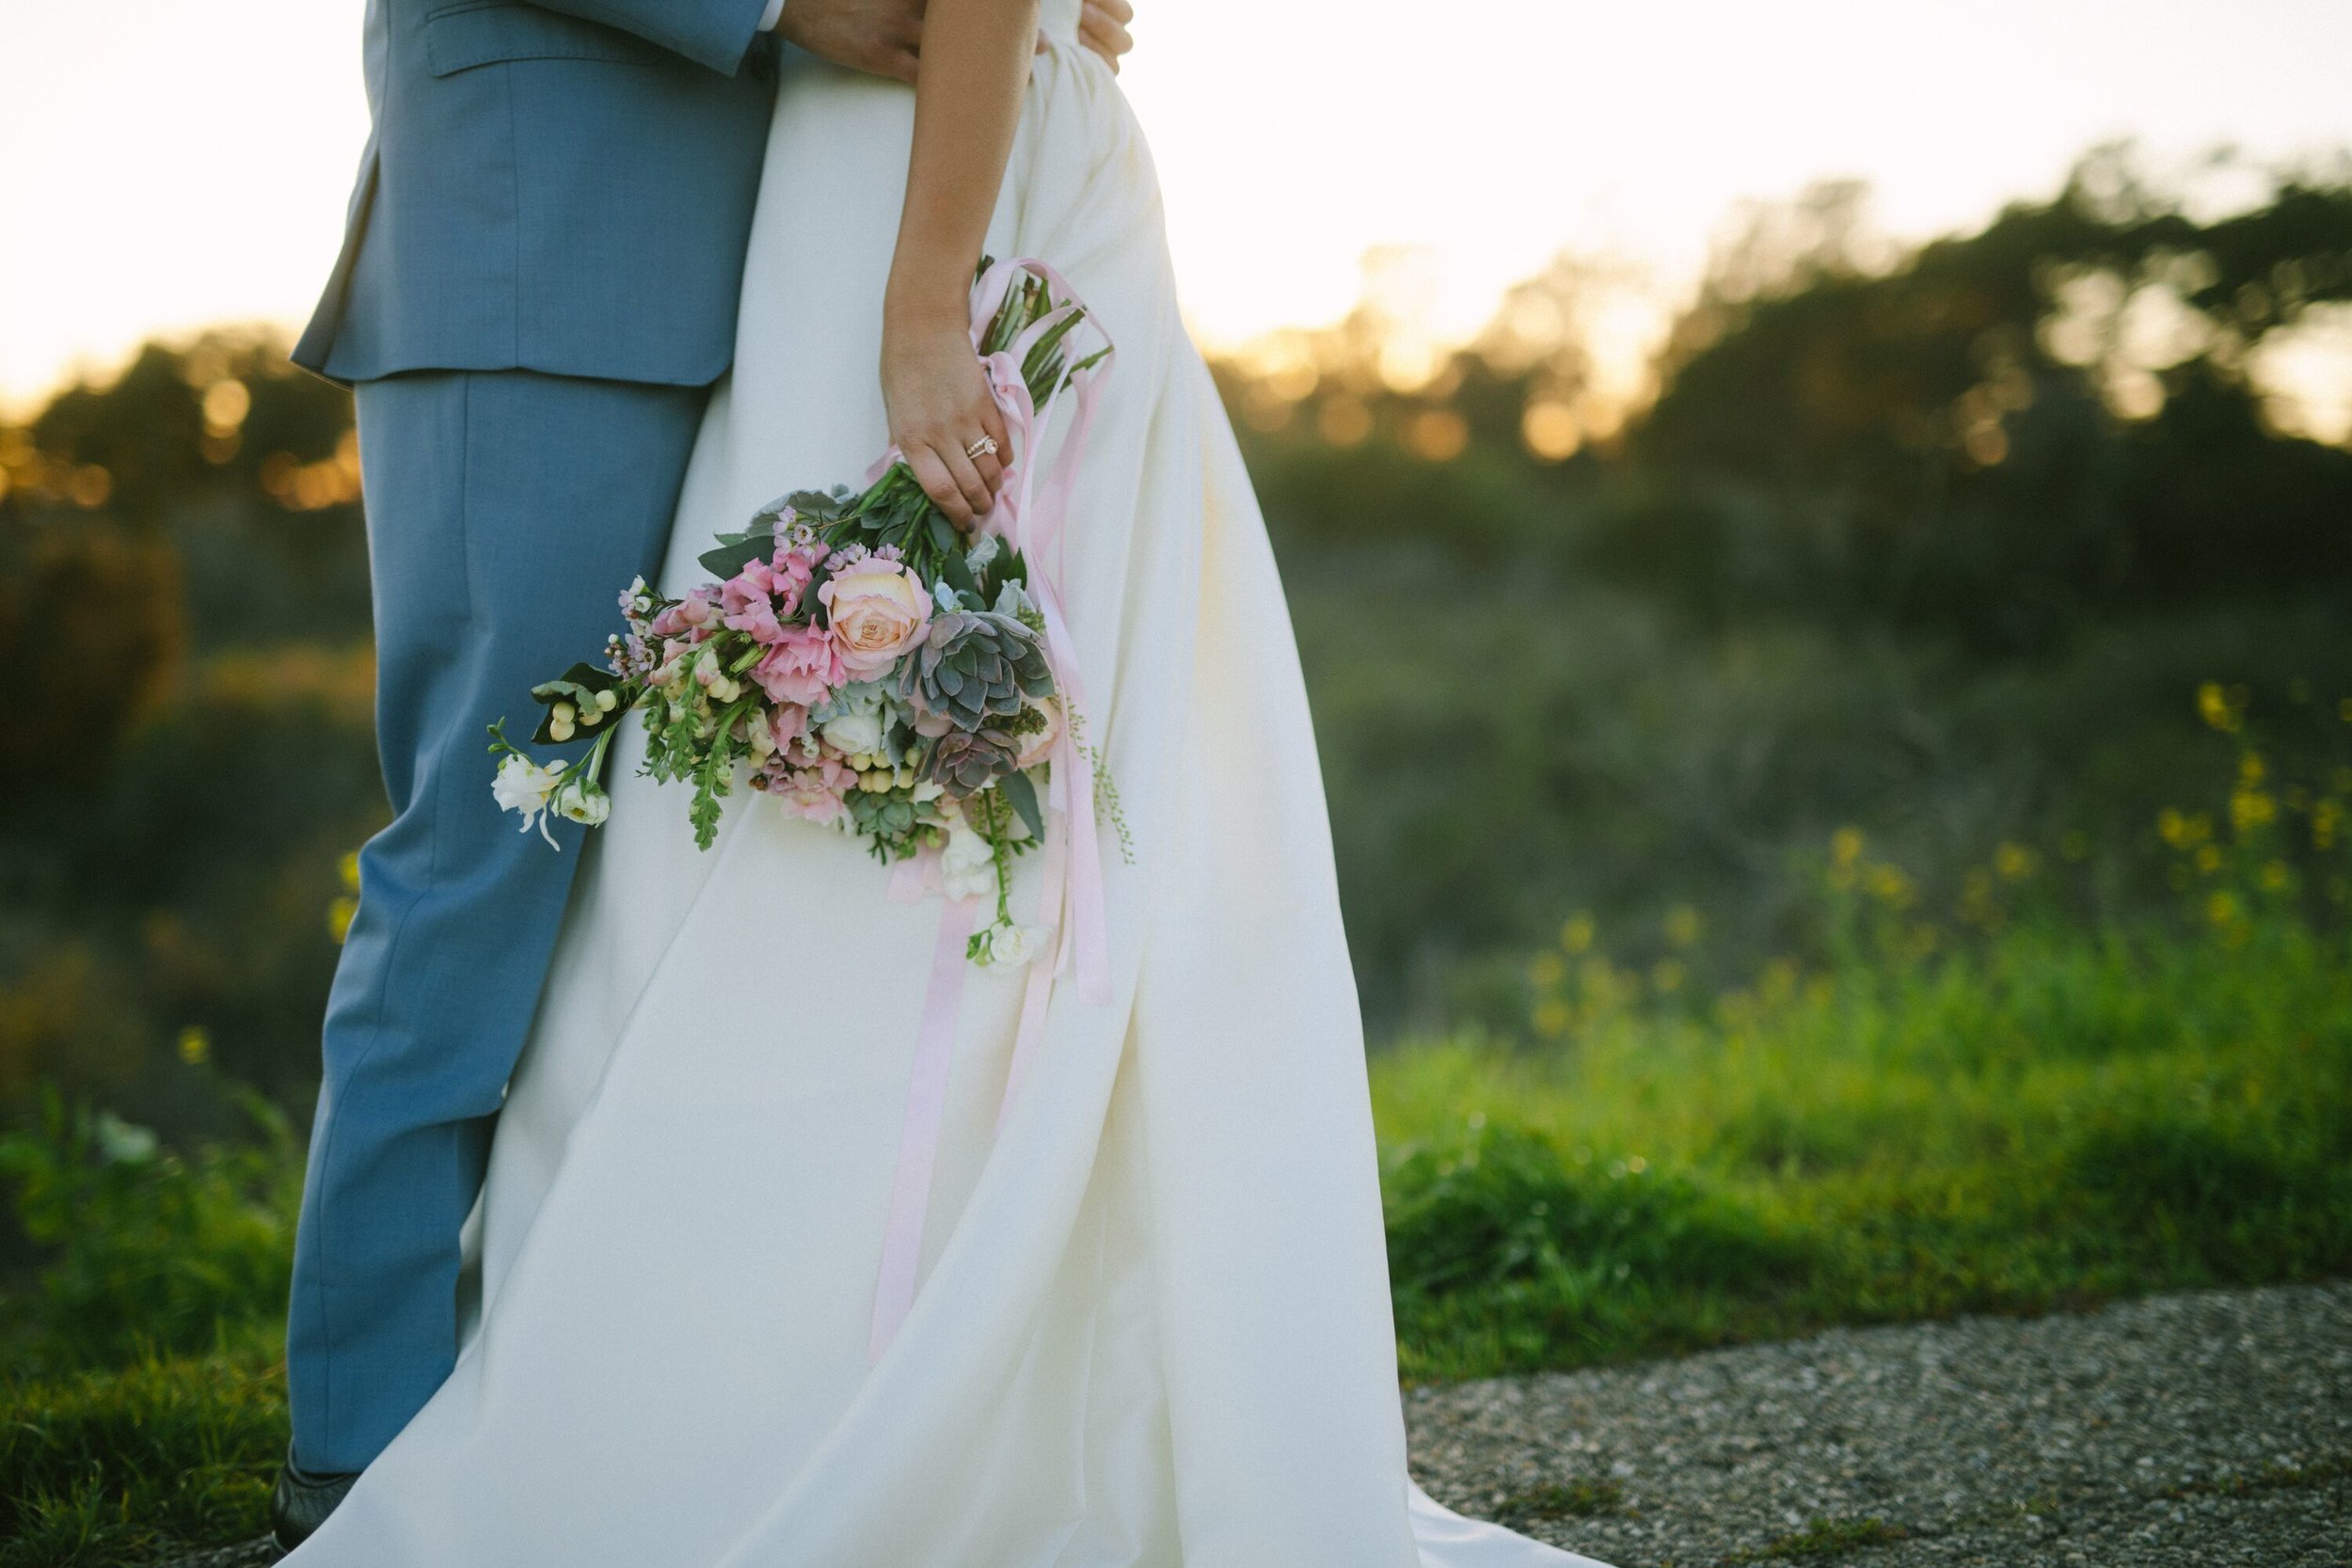 www.santabarbarawedding.com | Photographer: Patrick Ang | Venue: Rancho La Patera &amp; Stow House | Wedding Planner: Elyse Rowen of Elyse Events | Bride and Groom with Bouquet